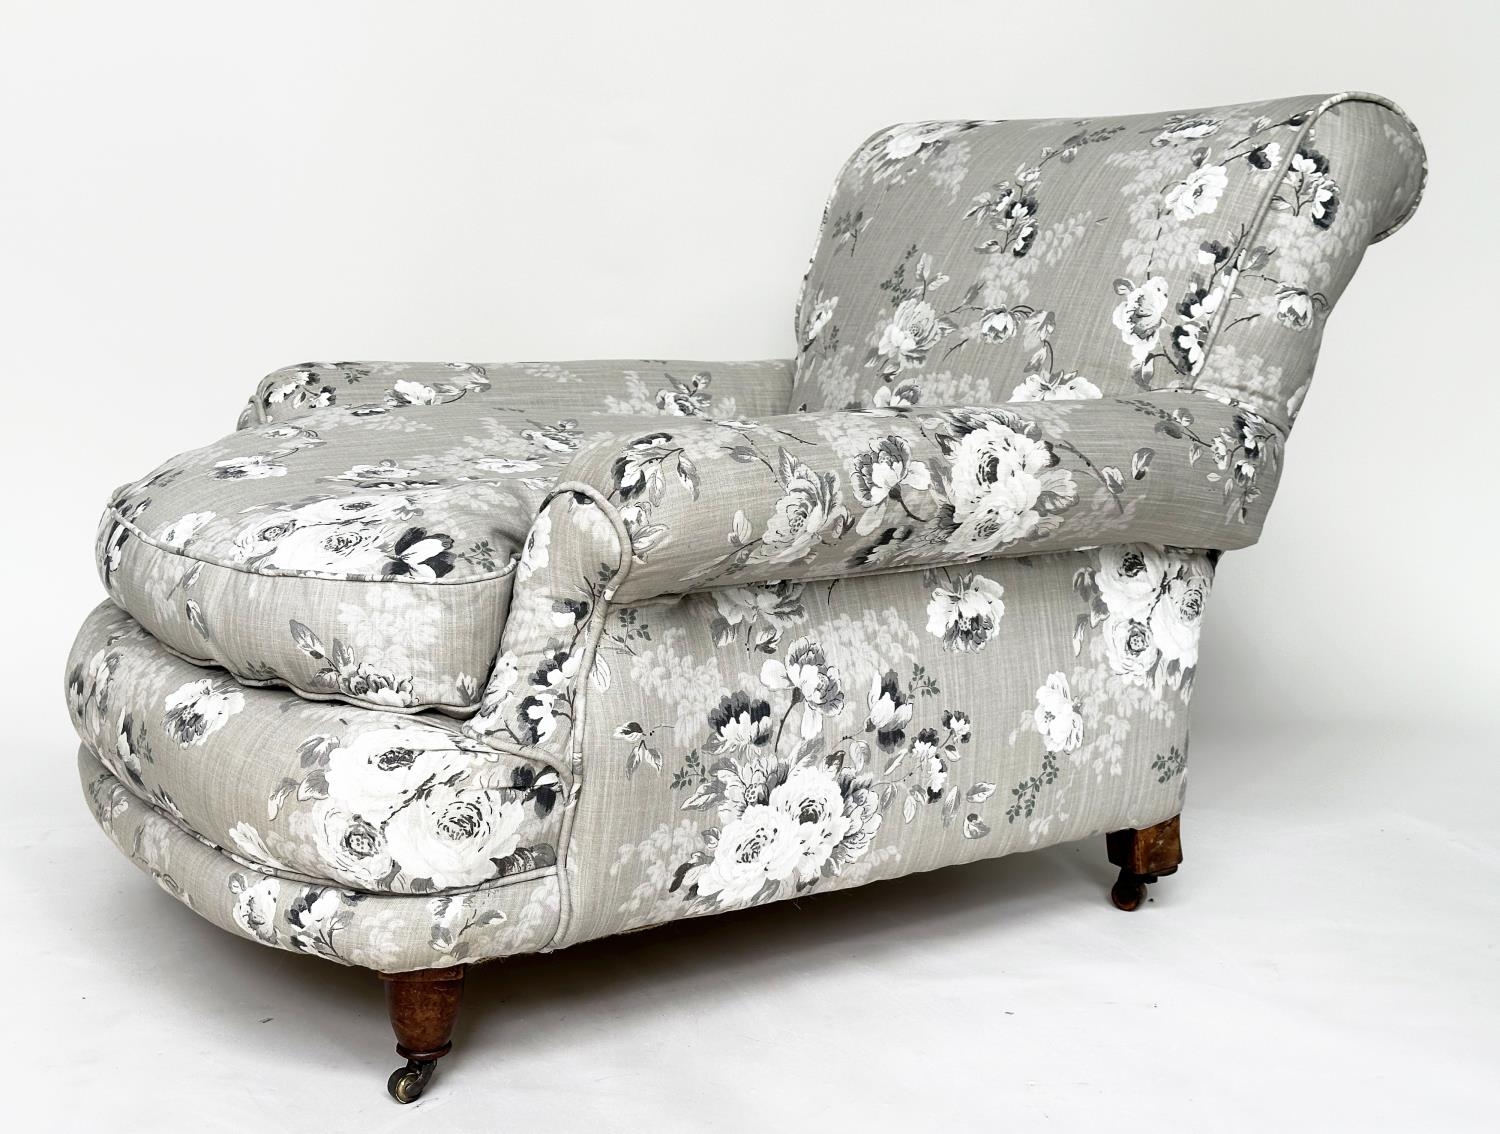 WILLIAM BIRCH ARMCHAIR, 19th century Howard type, newly upholstered in grey linen impressed numerals